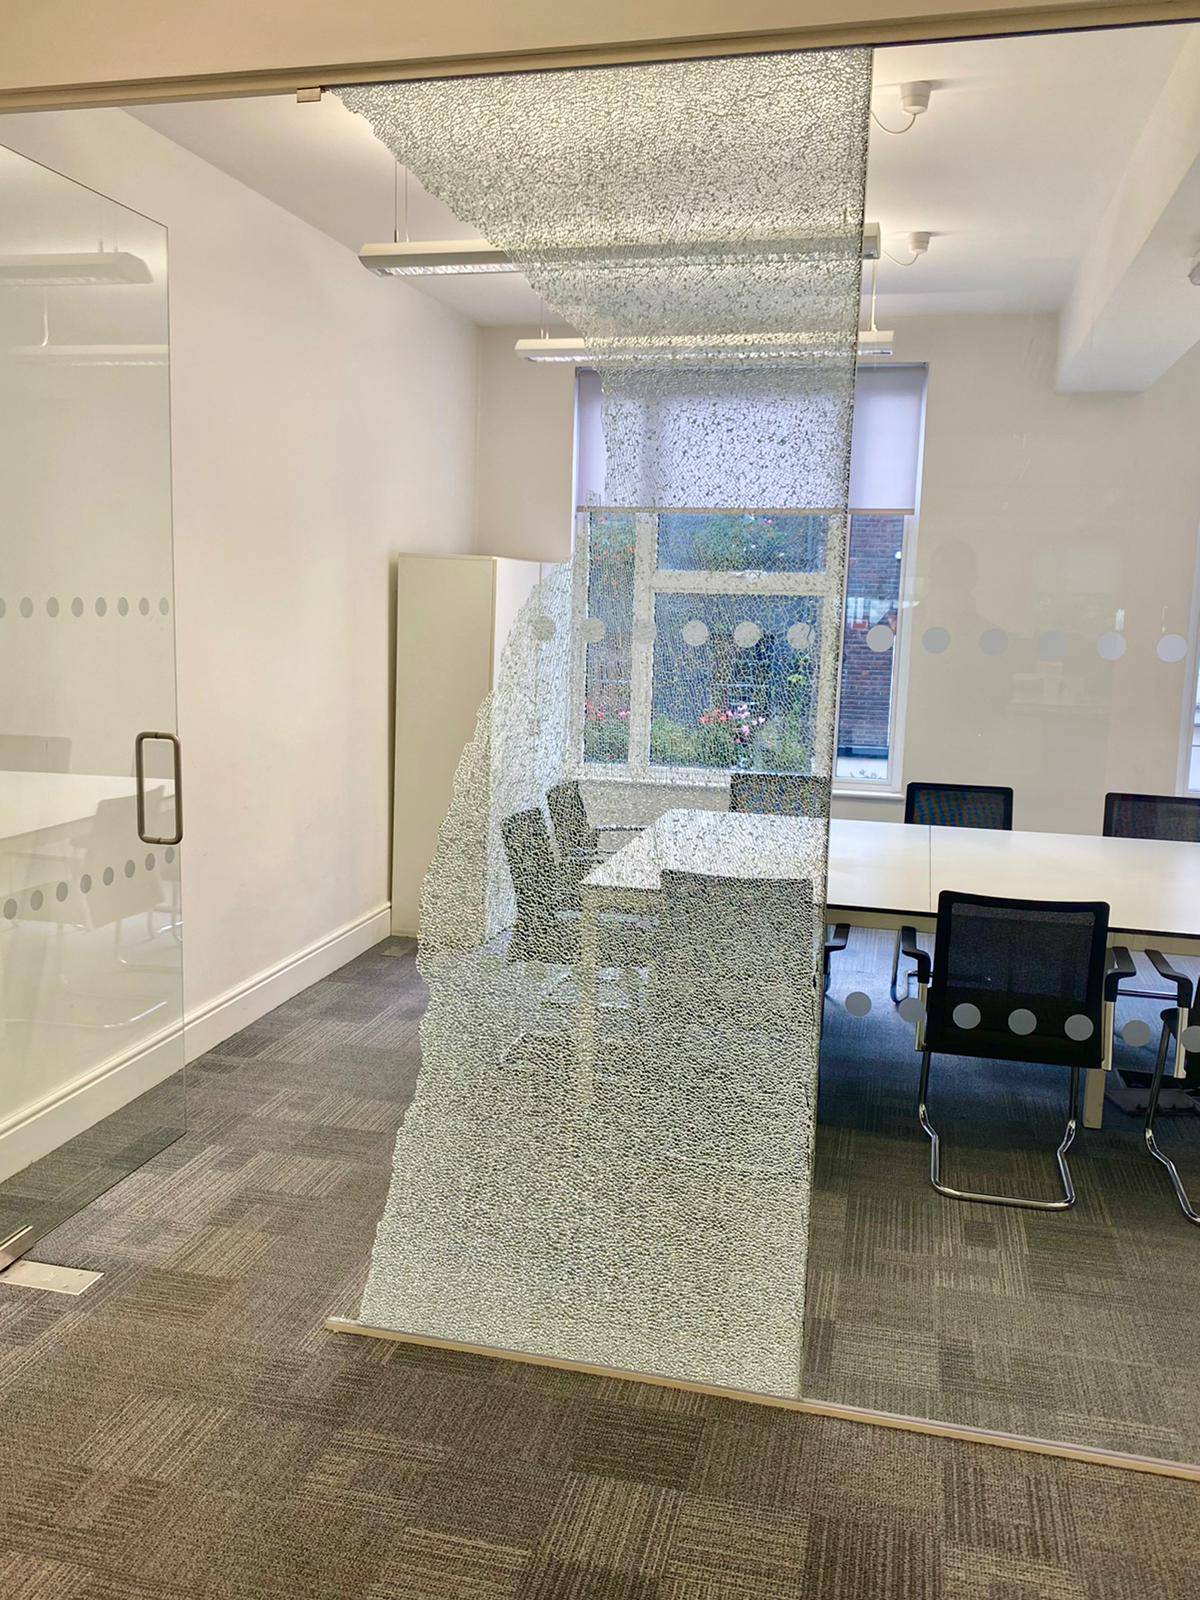 broken glass in the office before the repair